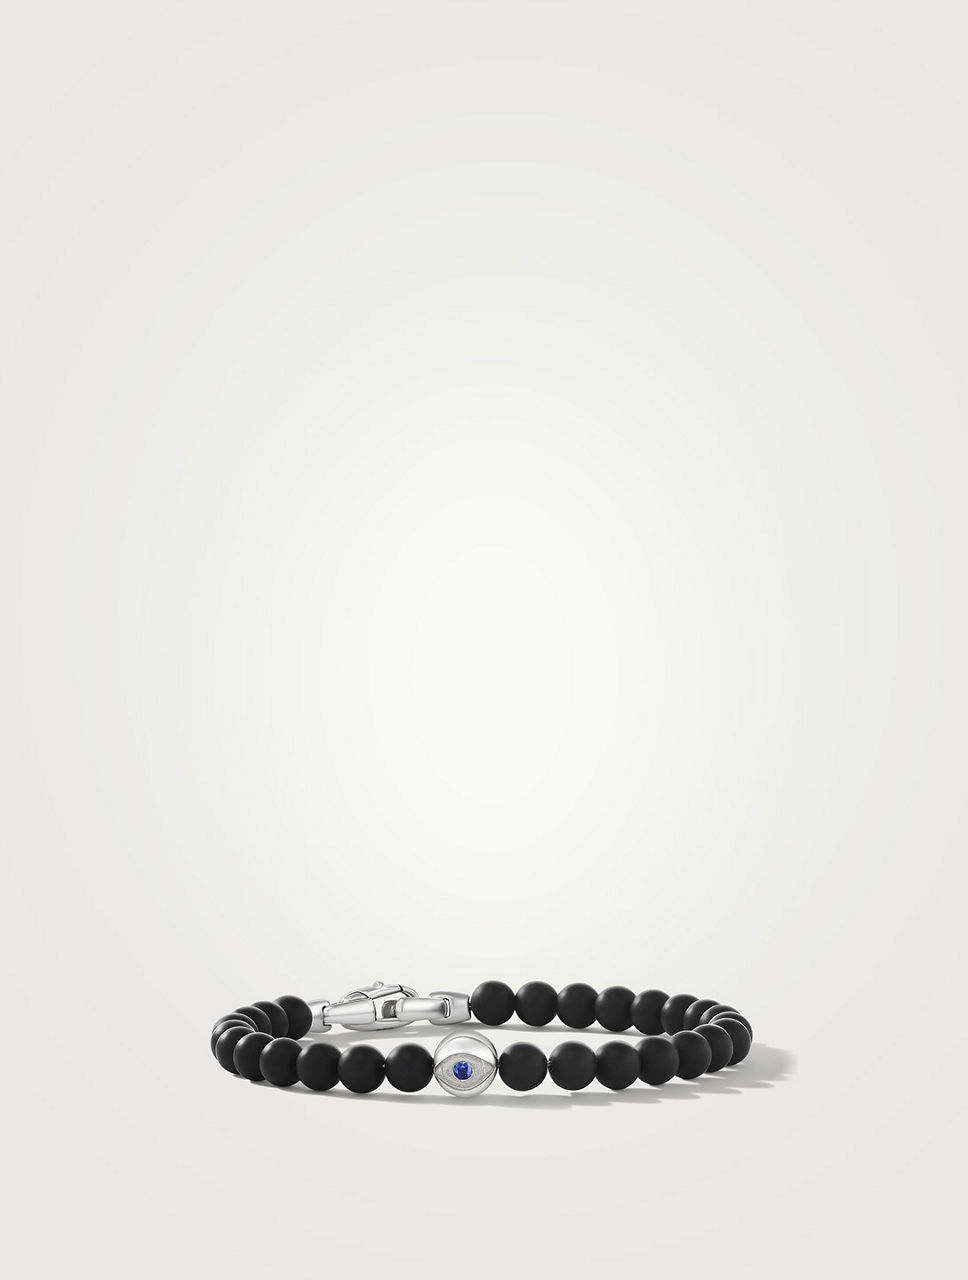 Spiritual Beads Evil Eye Bracelet Sterling Silver With Black Onyx And Sapphire